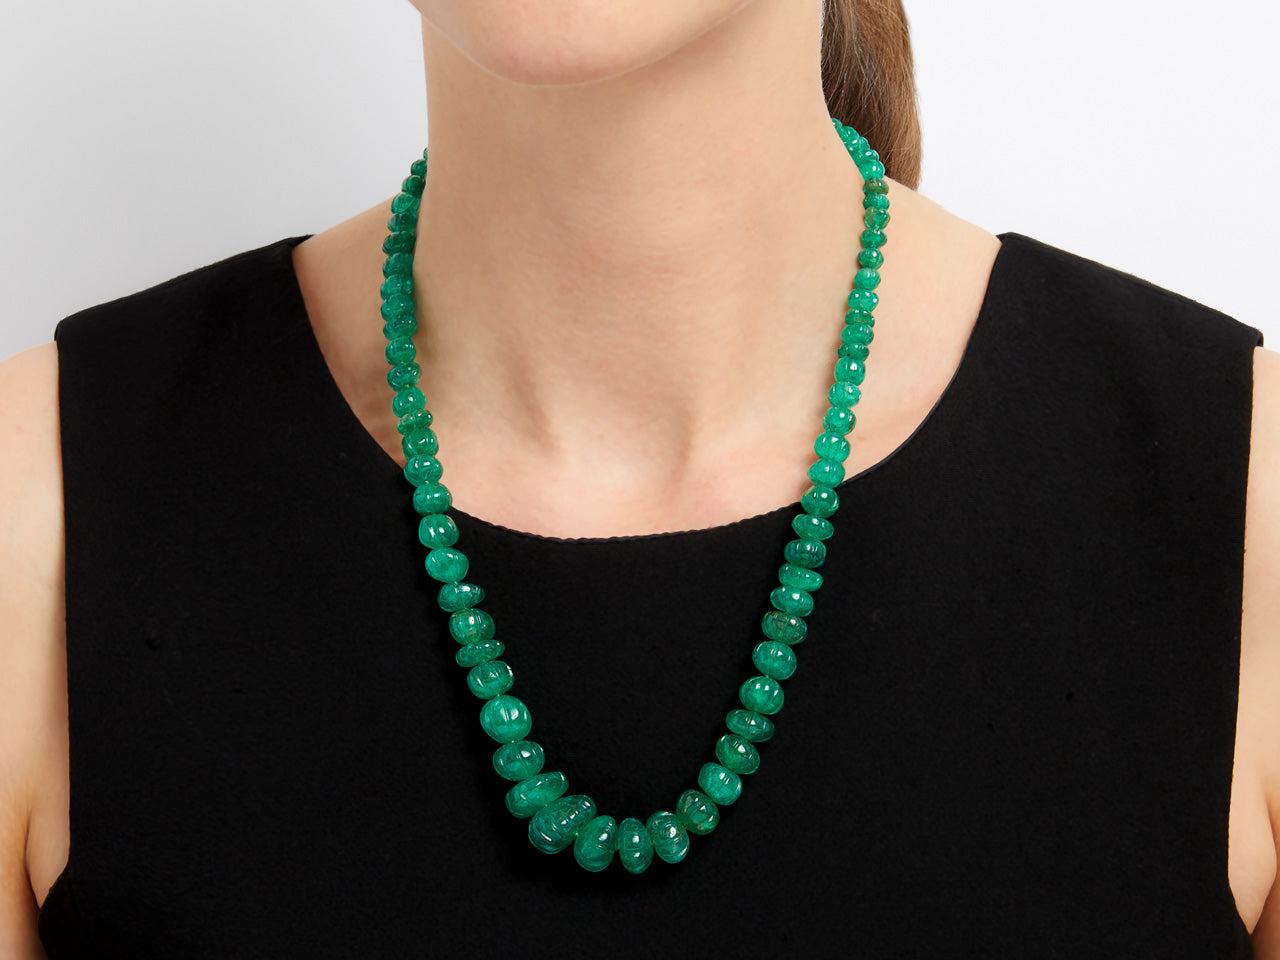 White Gold, Lavender Jadeite, Green Jadeite And Diamond Bead Necklace  Available For Immediate Sale At Sotheby's